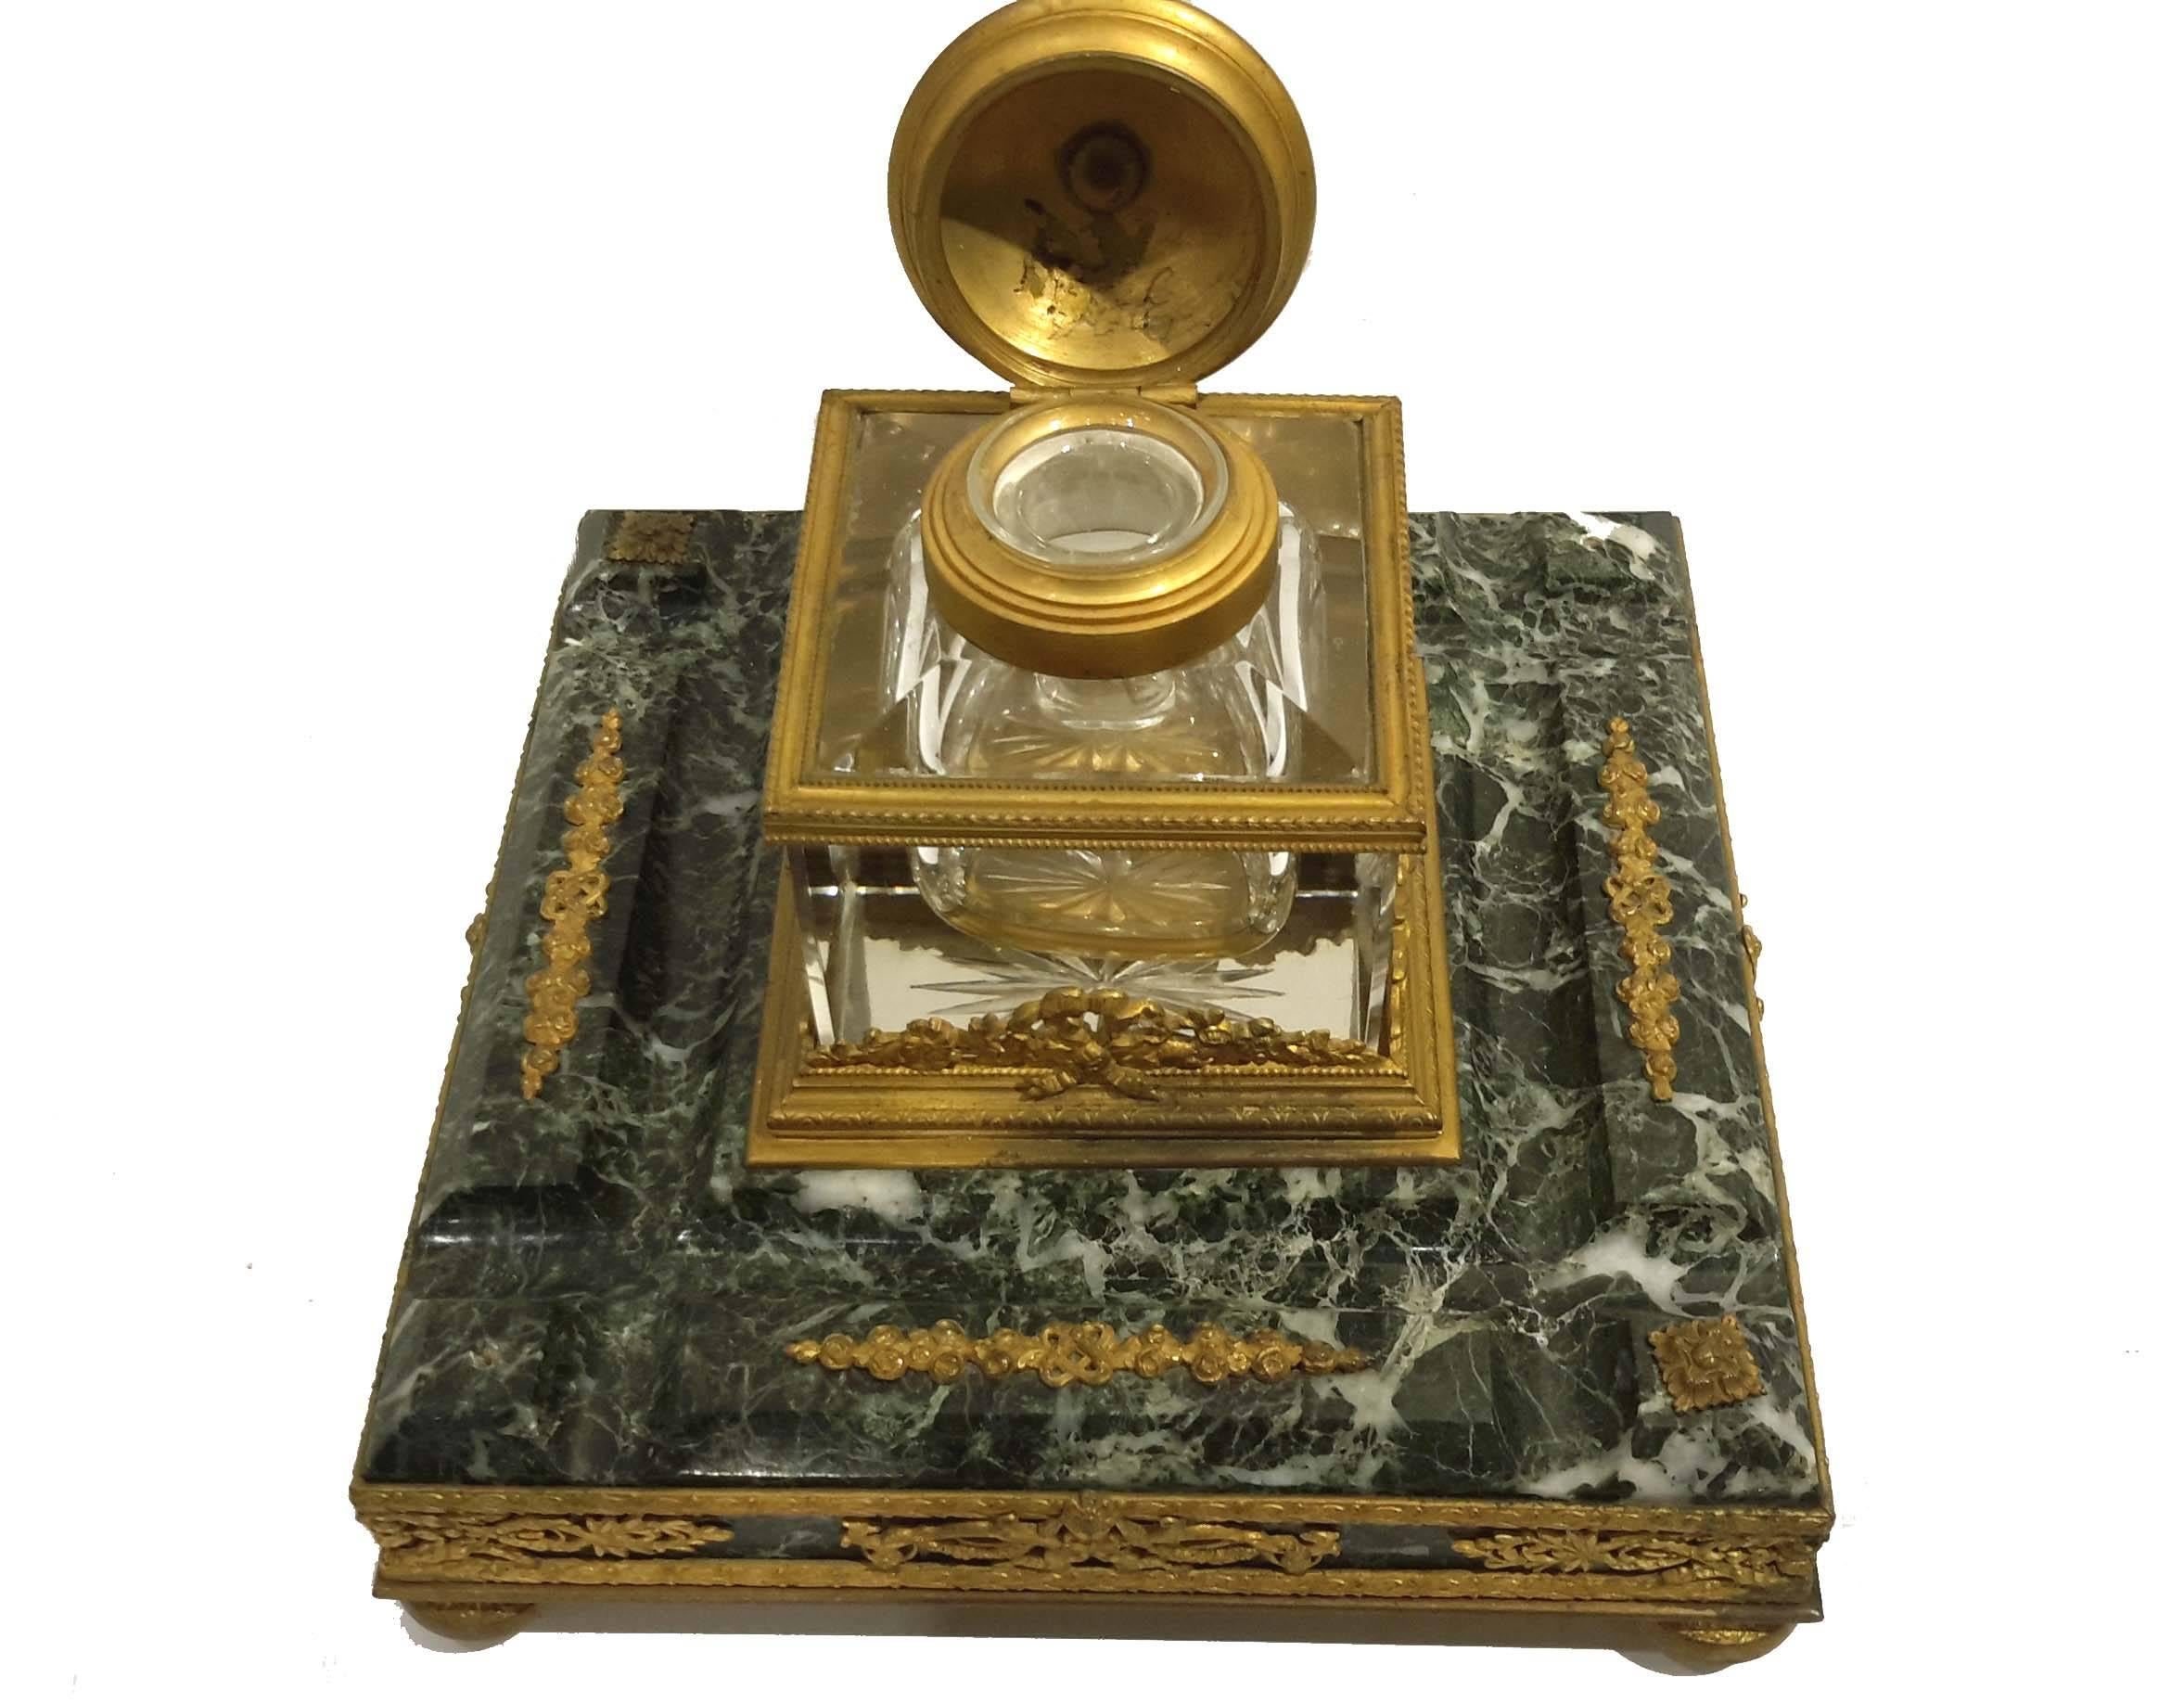 Great quality French inkwell, circa 1890. Intricate bronze work on Verde green carved marble with cut crystal ink container.
Condition: Missing one small rosette. Minor wear to gilding.